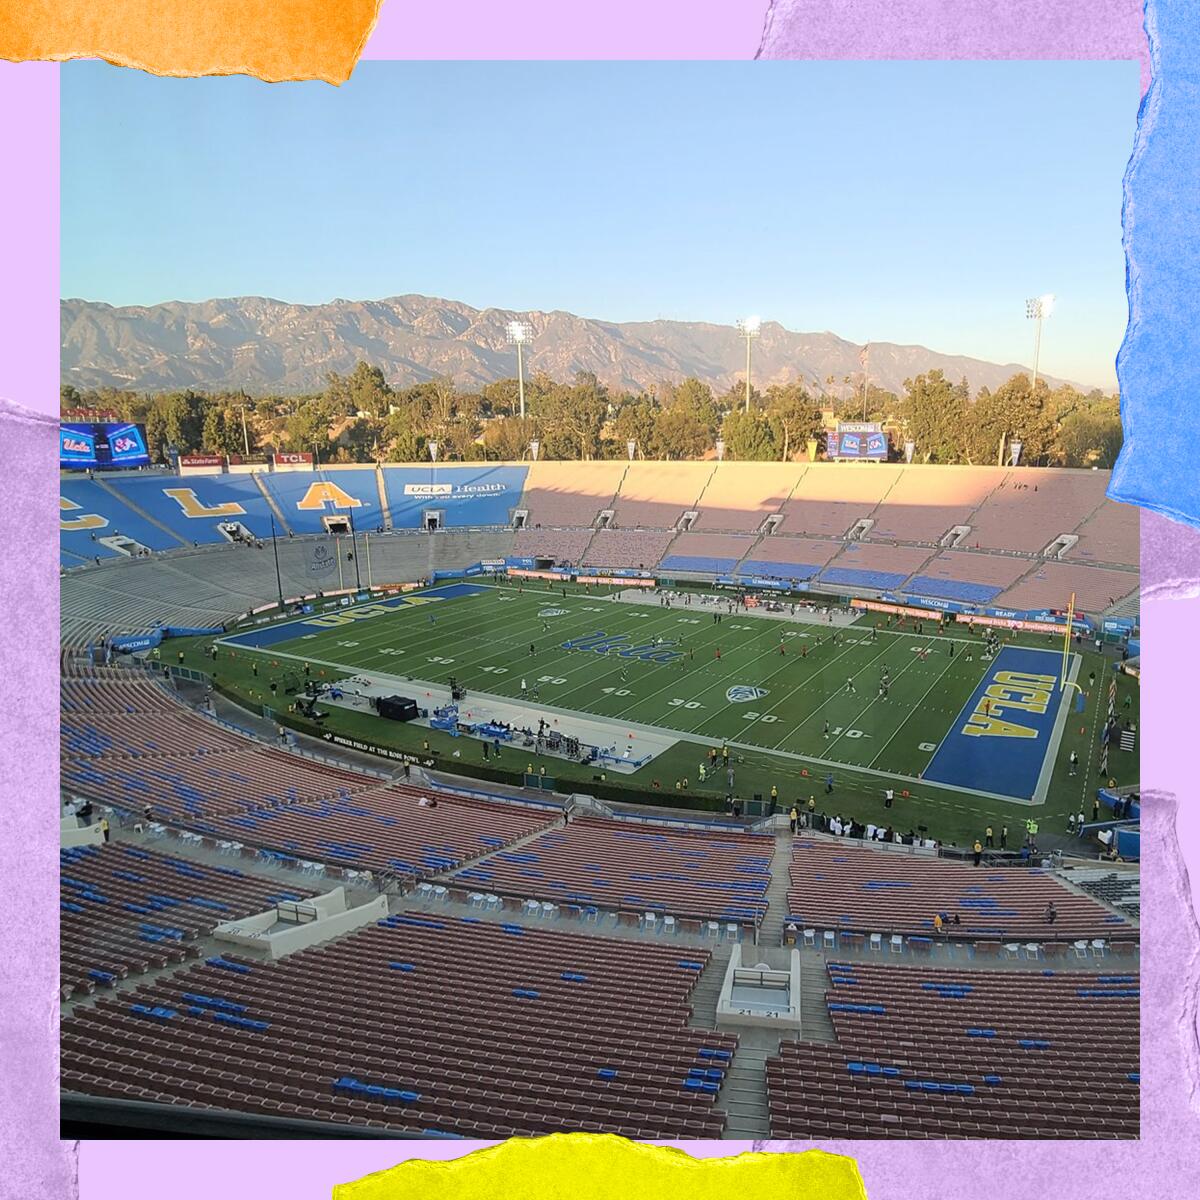 A view from above of the empty Rose Bowl football stadium.